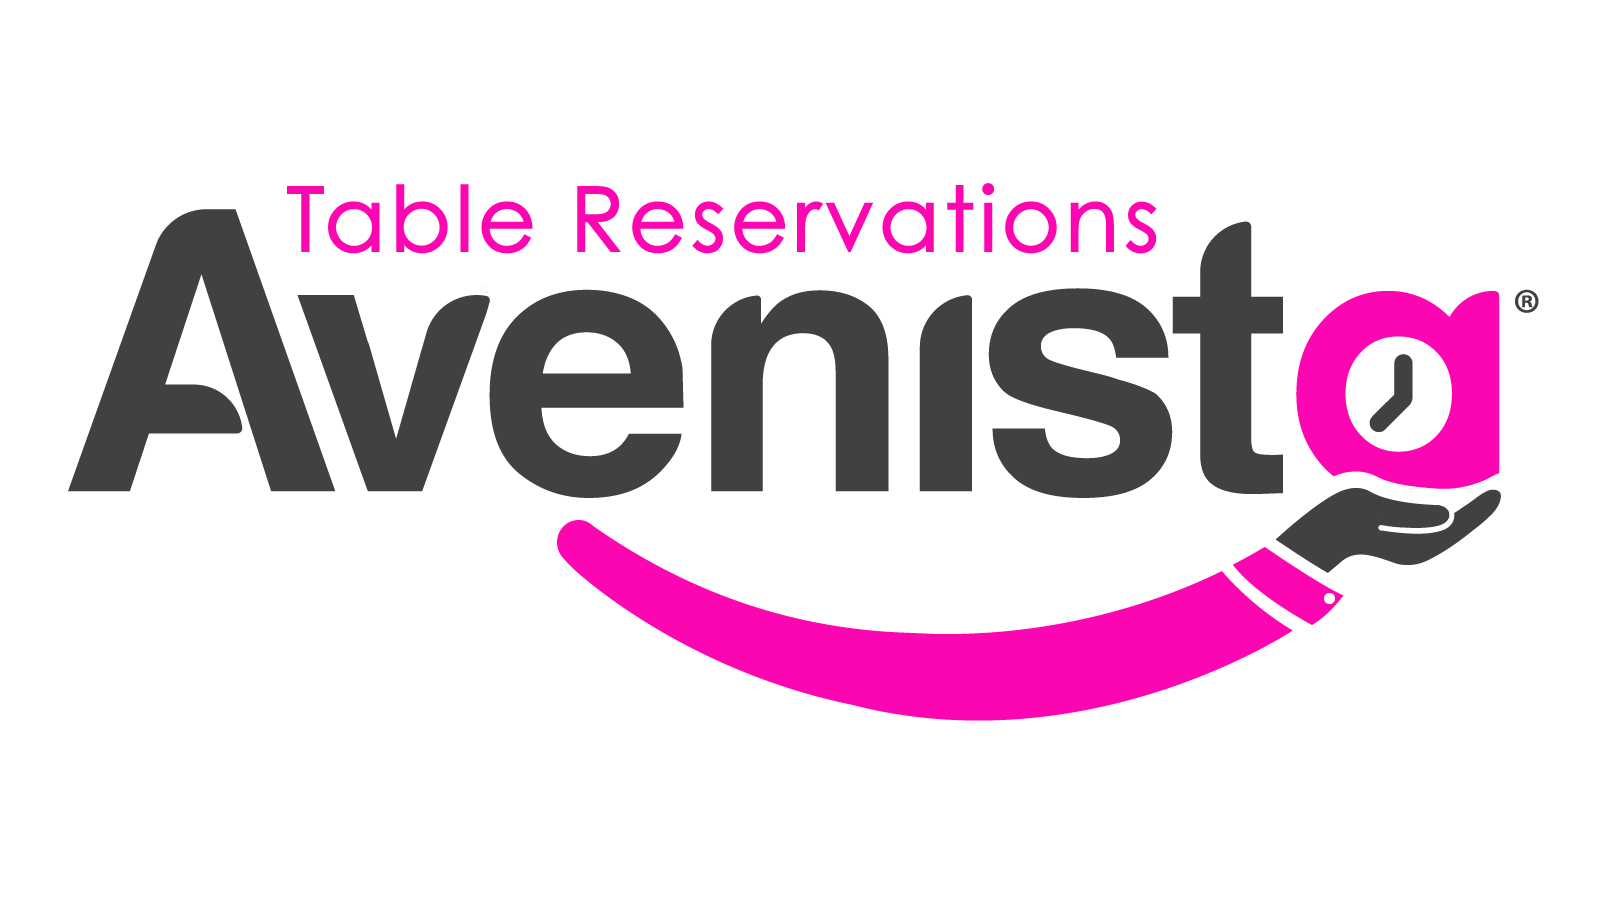 Avenista' Table Reservations